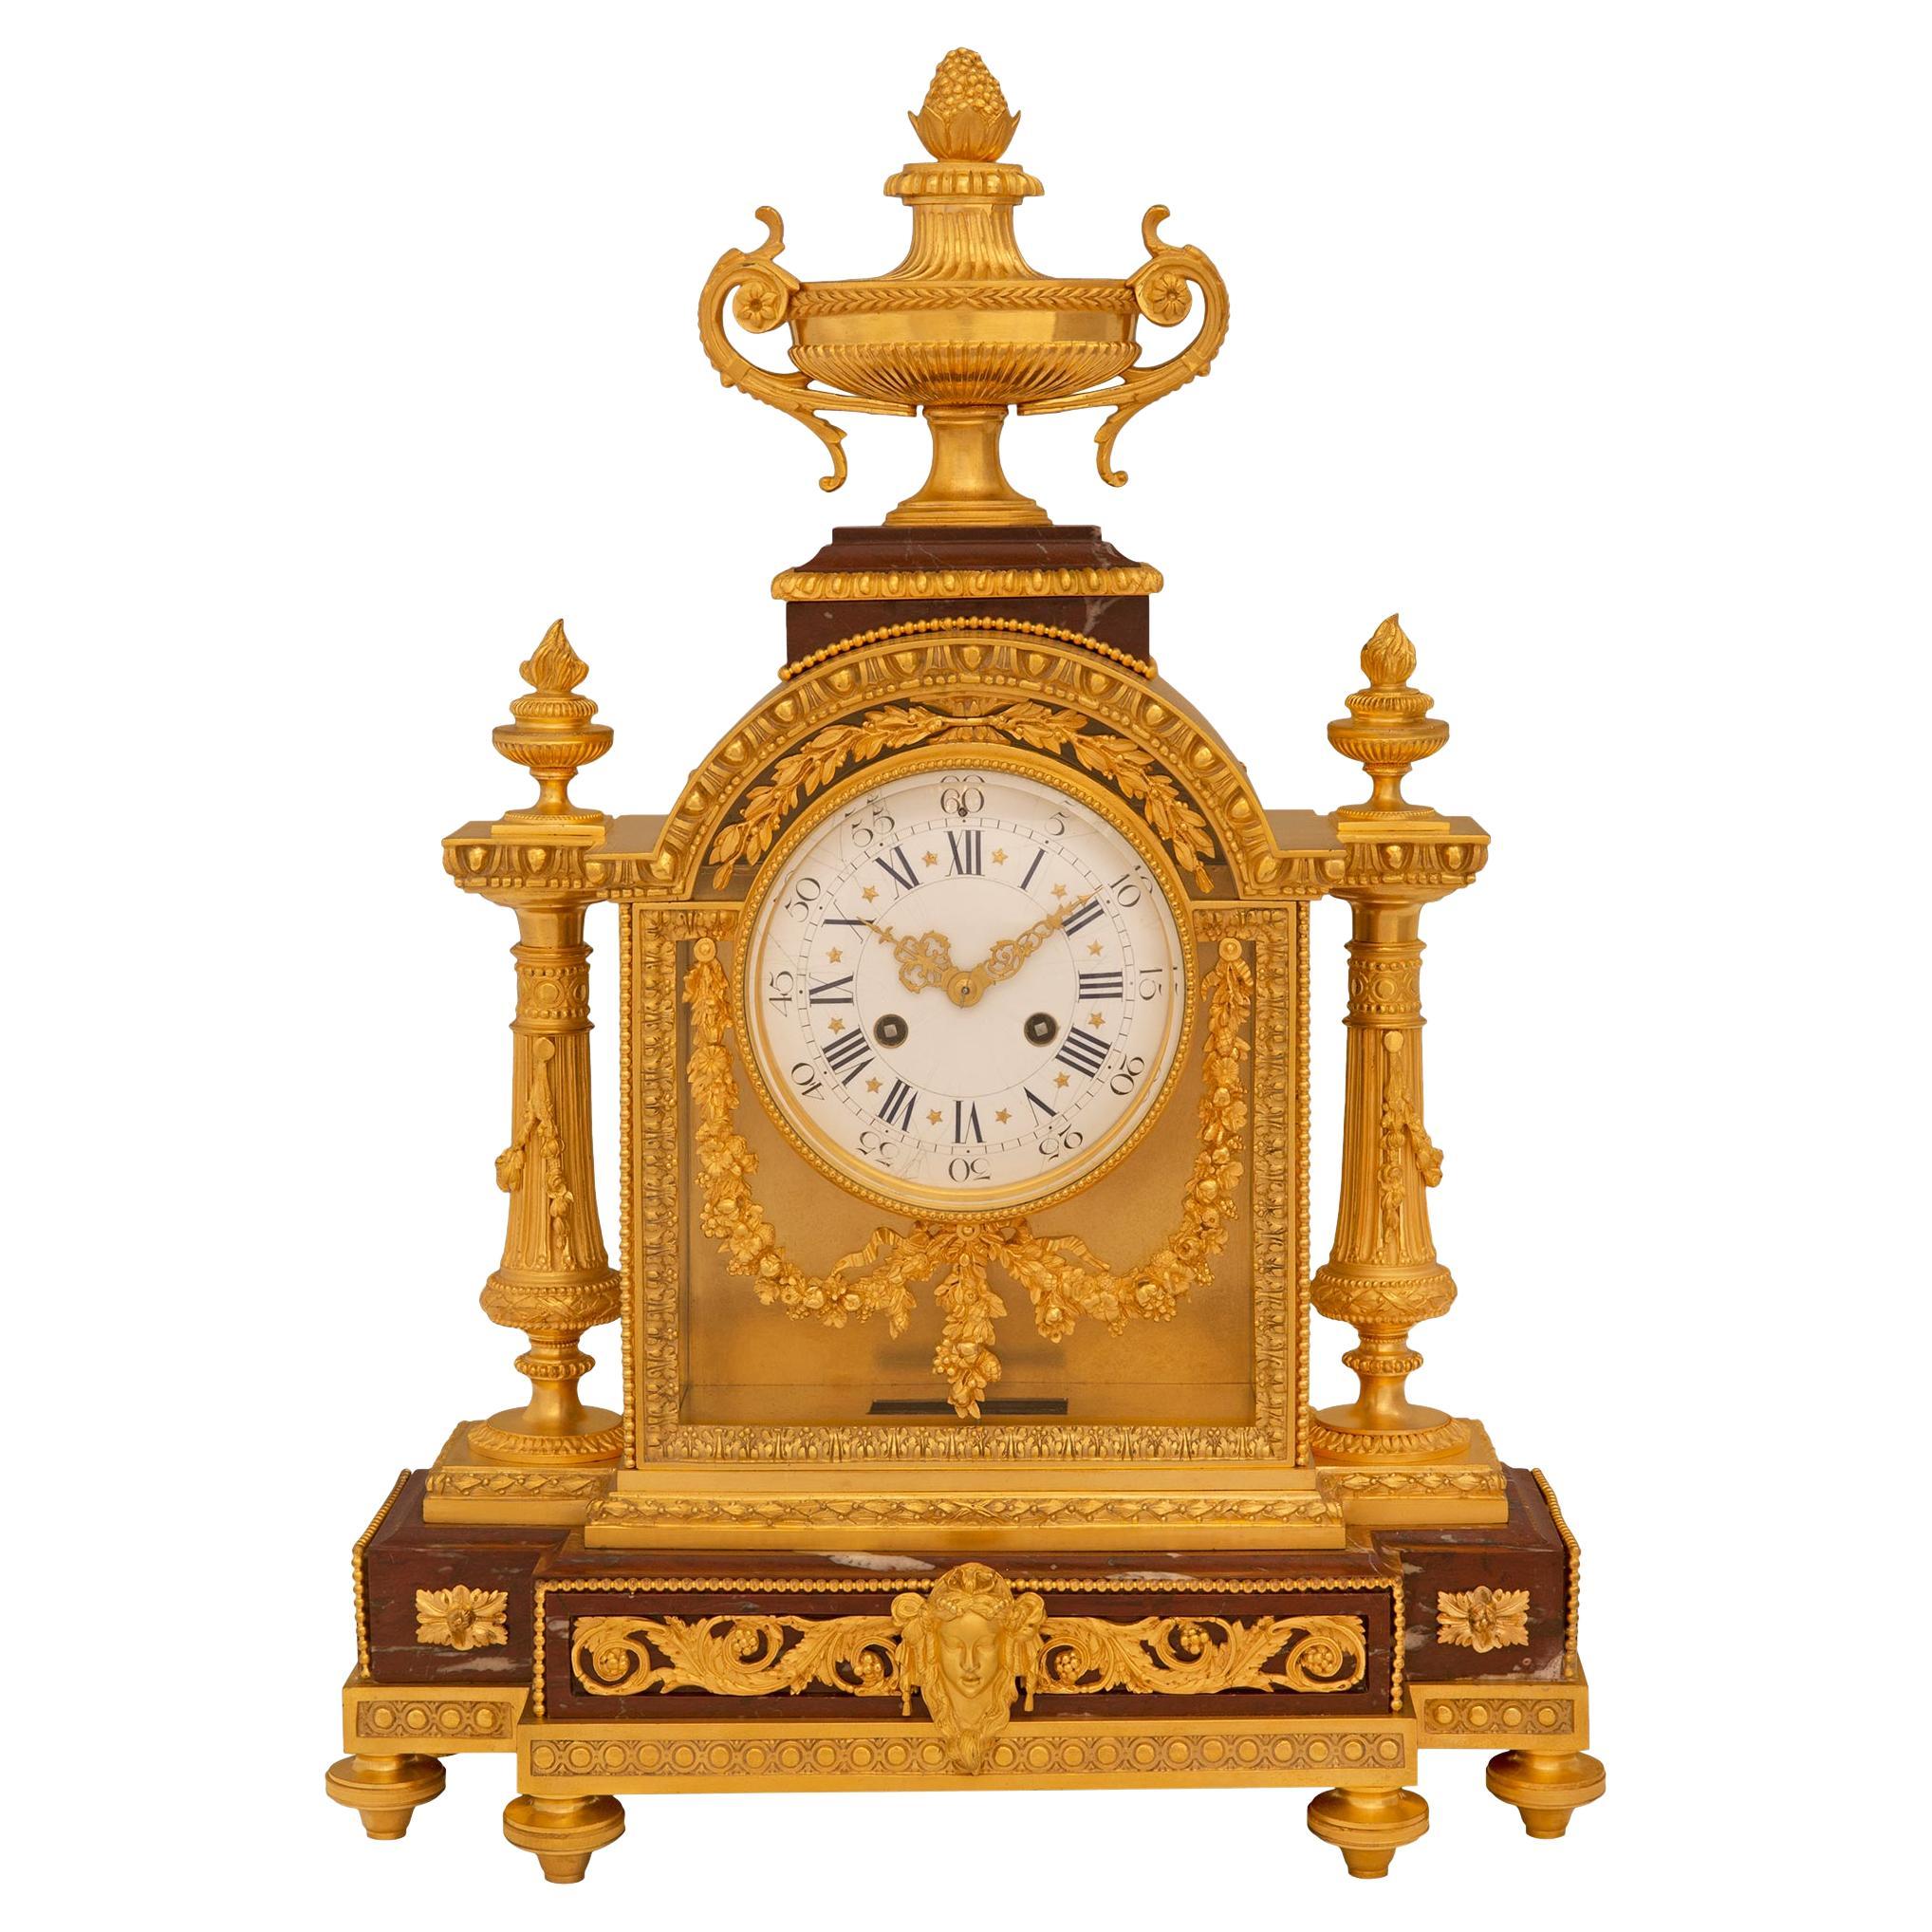 A French 19th century Louis XVI st. clock signed Le Merle Charpentier Bronzier 